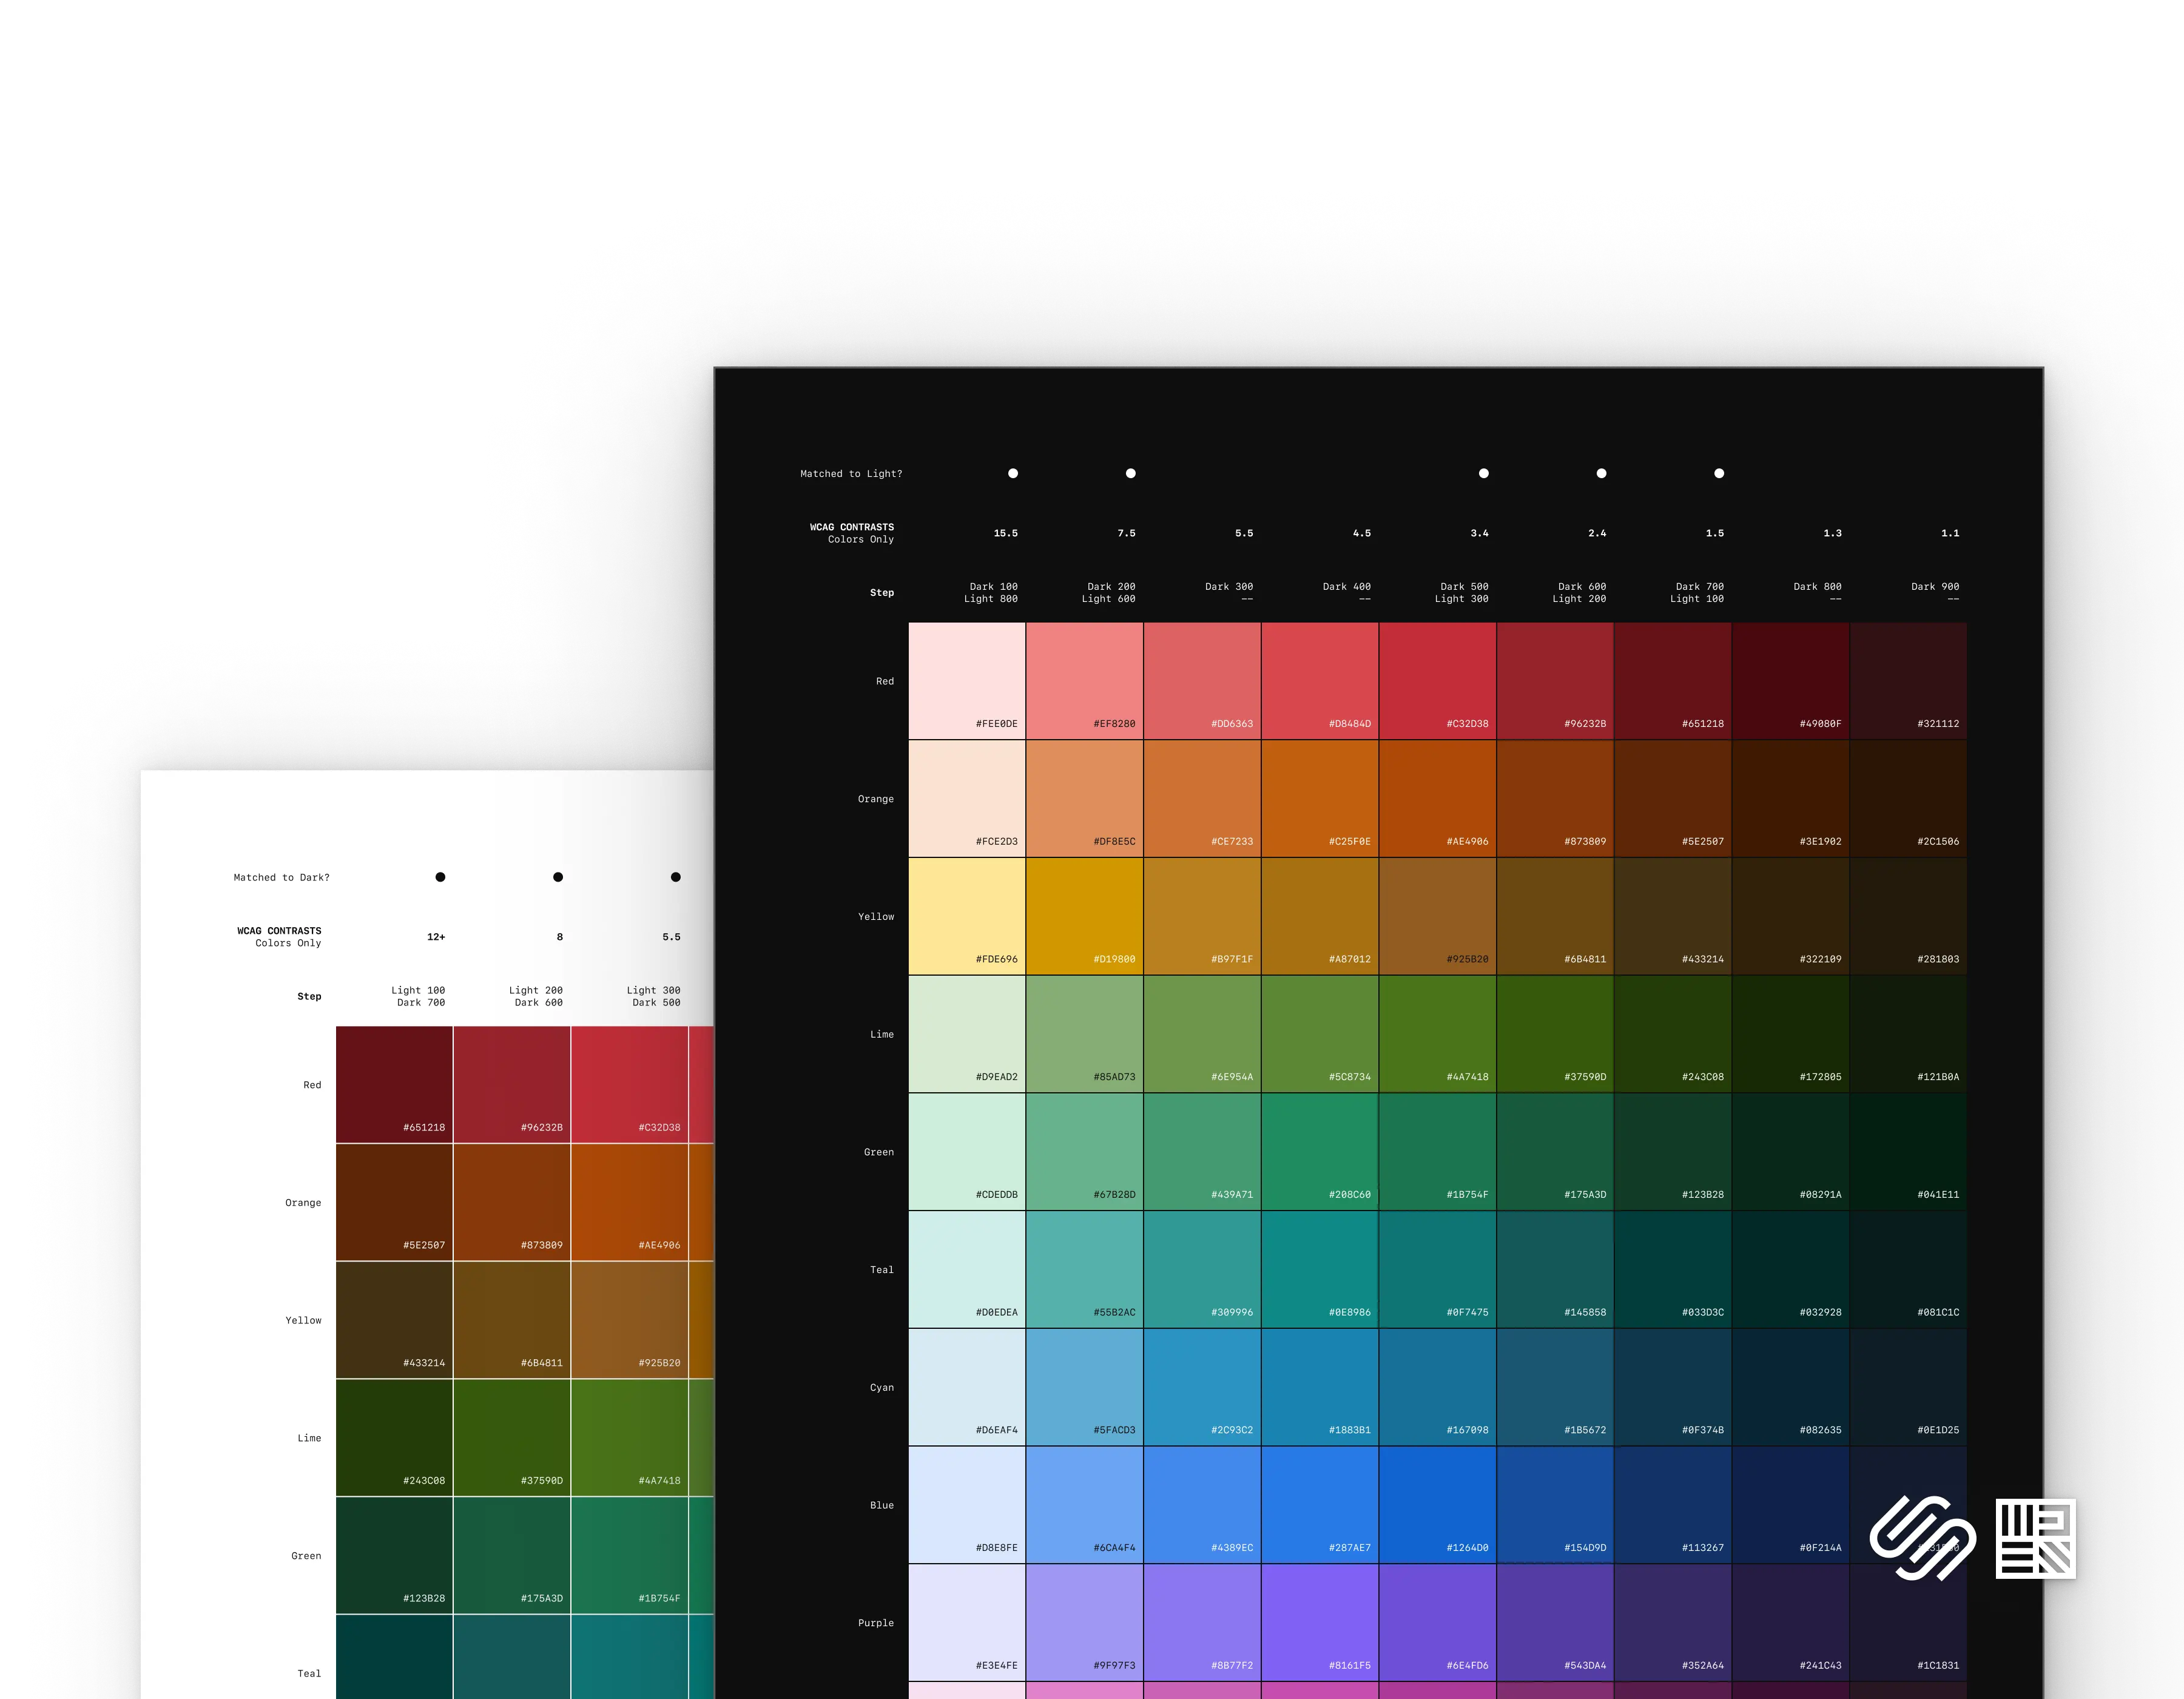 Two images showing the light and dark theme full color palettes for Squarespace's design system